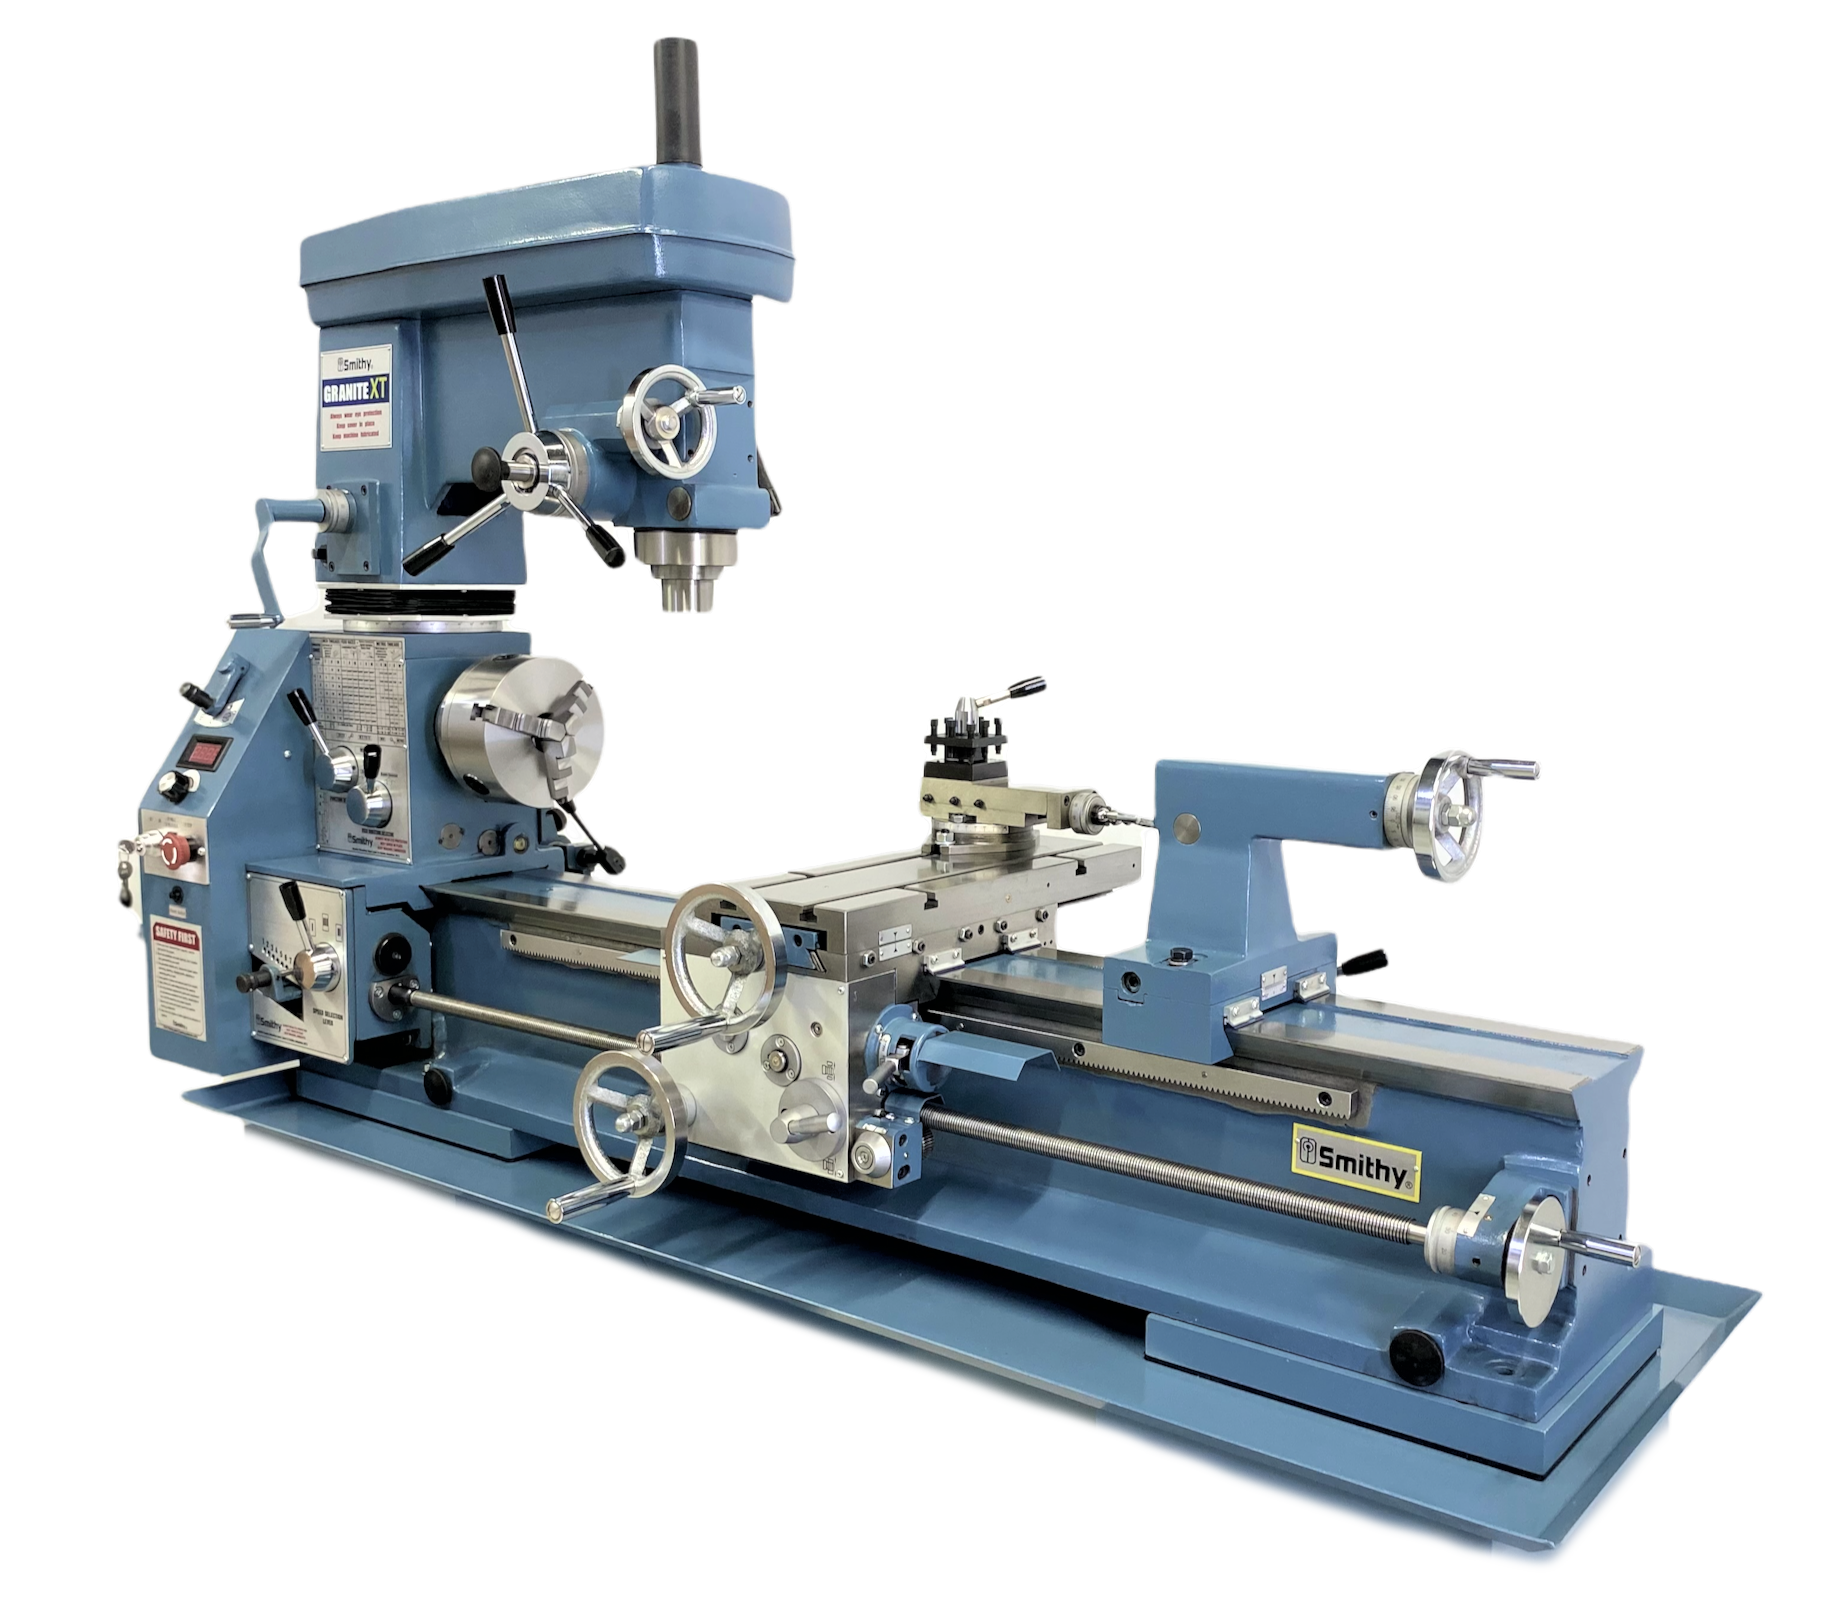 Smithy, lathe mill combo, lathe mill drill, 3-in-1 lathe mill drill, granite, smithy.com